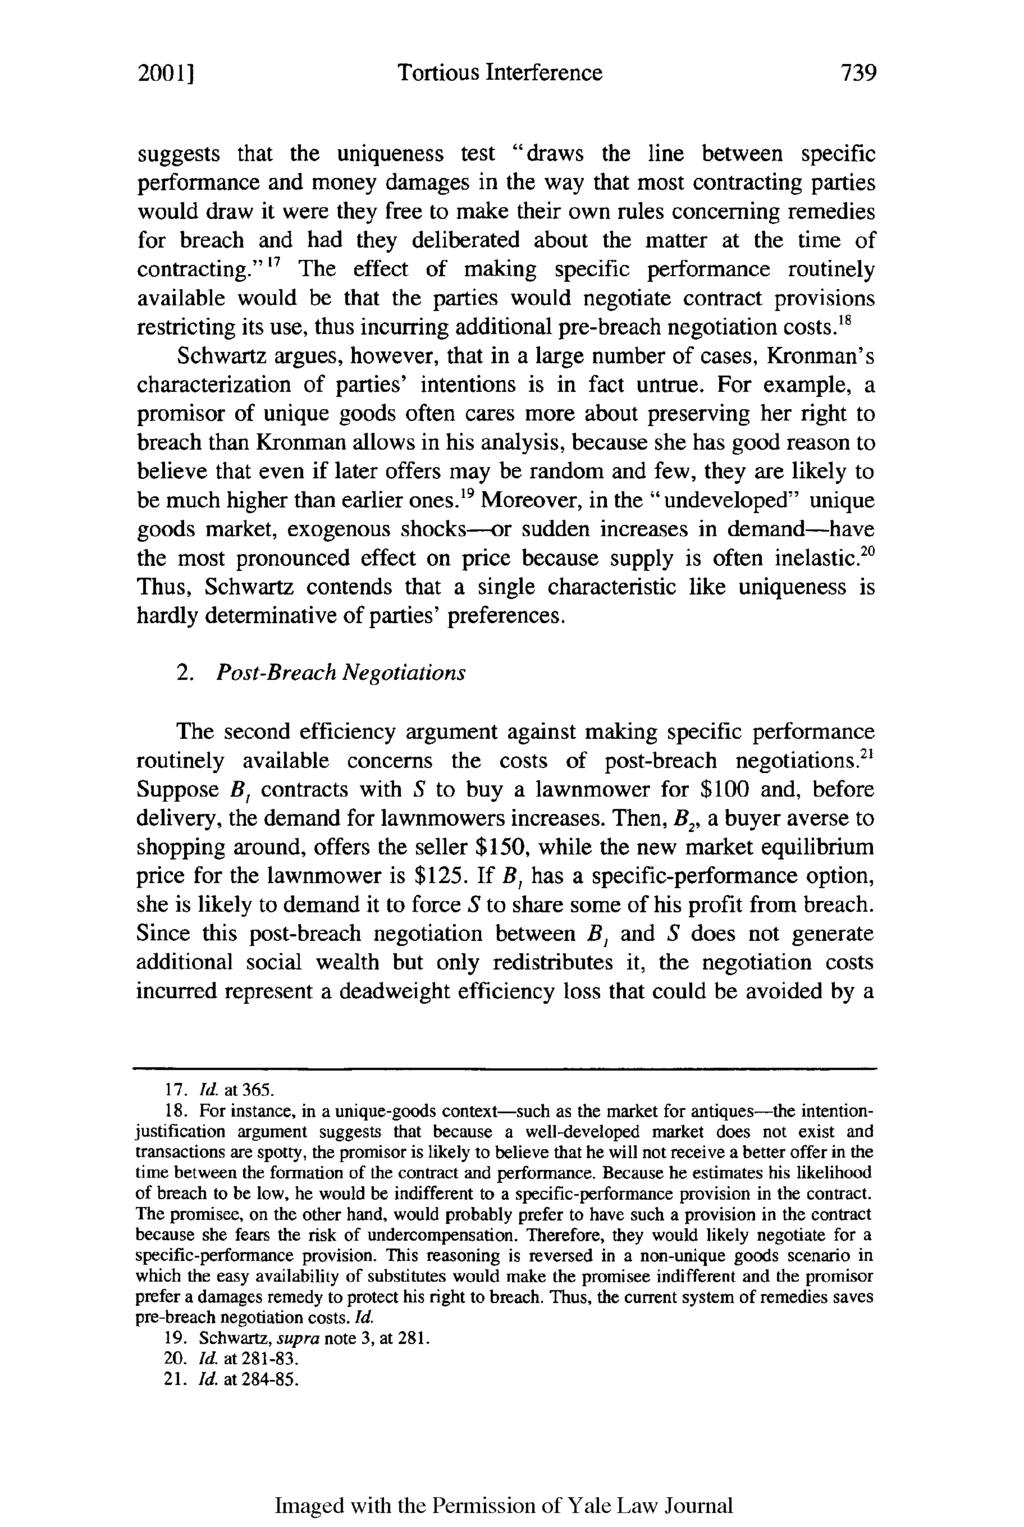 20011 Tortious Interference suggests that the uniqueness test "draws the line between specific performance and money damages in the way that most contracting parties would draw it were they free to